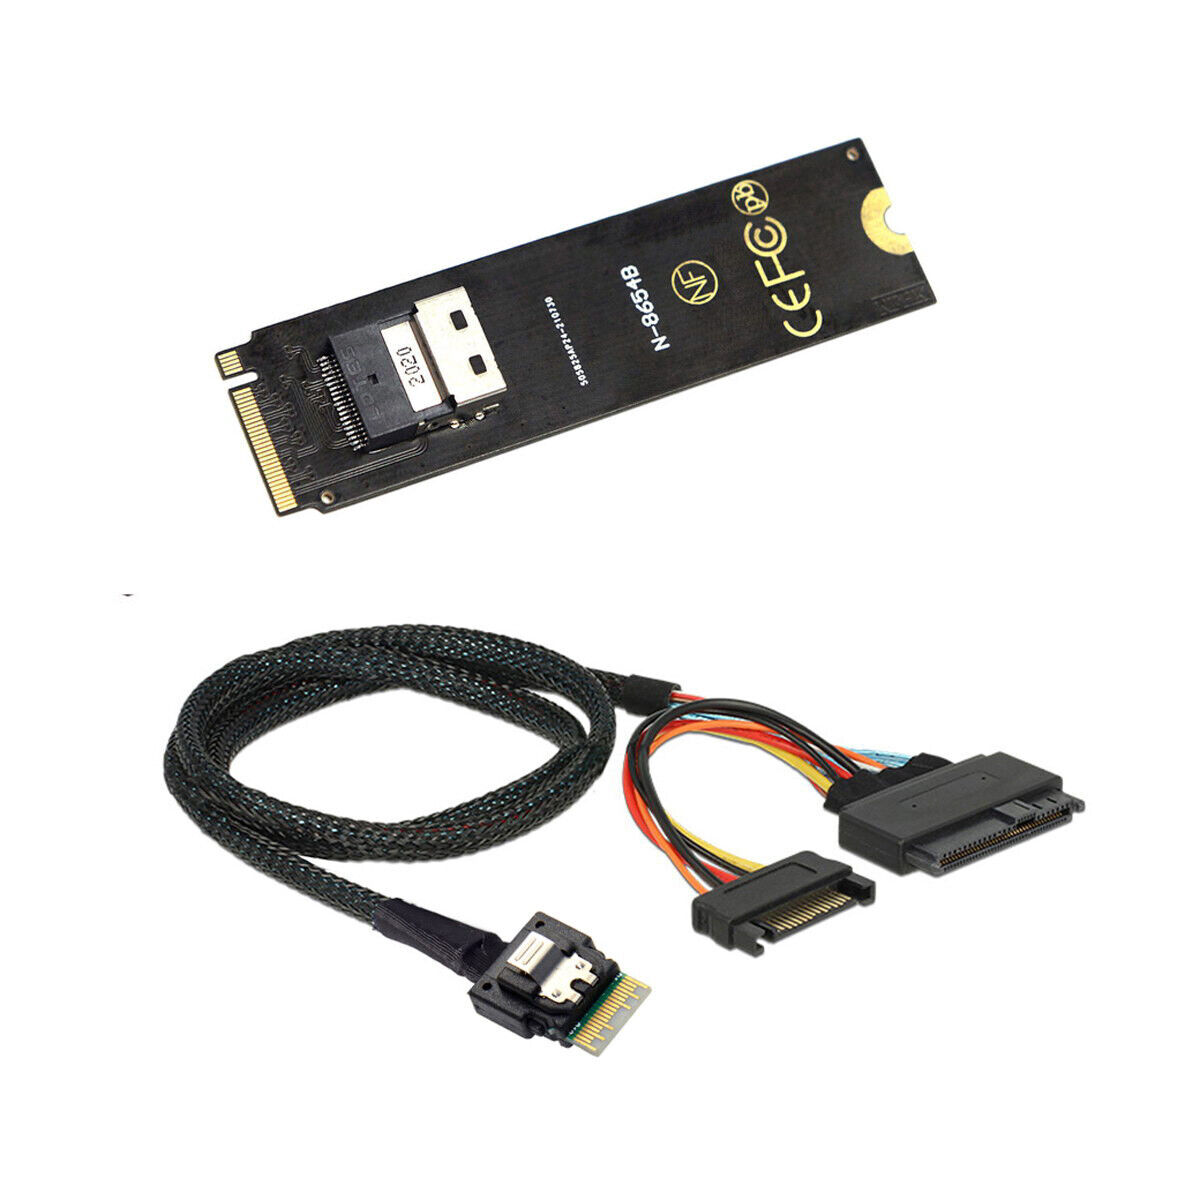 NFHK NGFF M-Key NVME to SFF-8654 Card Adapter and U.2 SFF-8639 PCIe SSD Cable